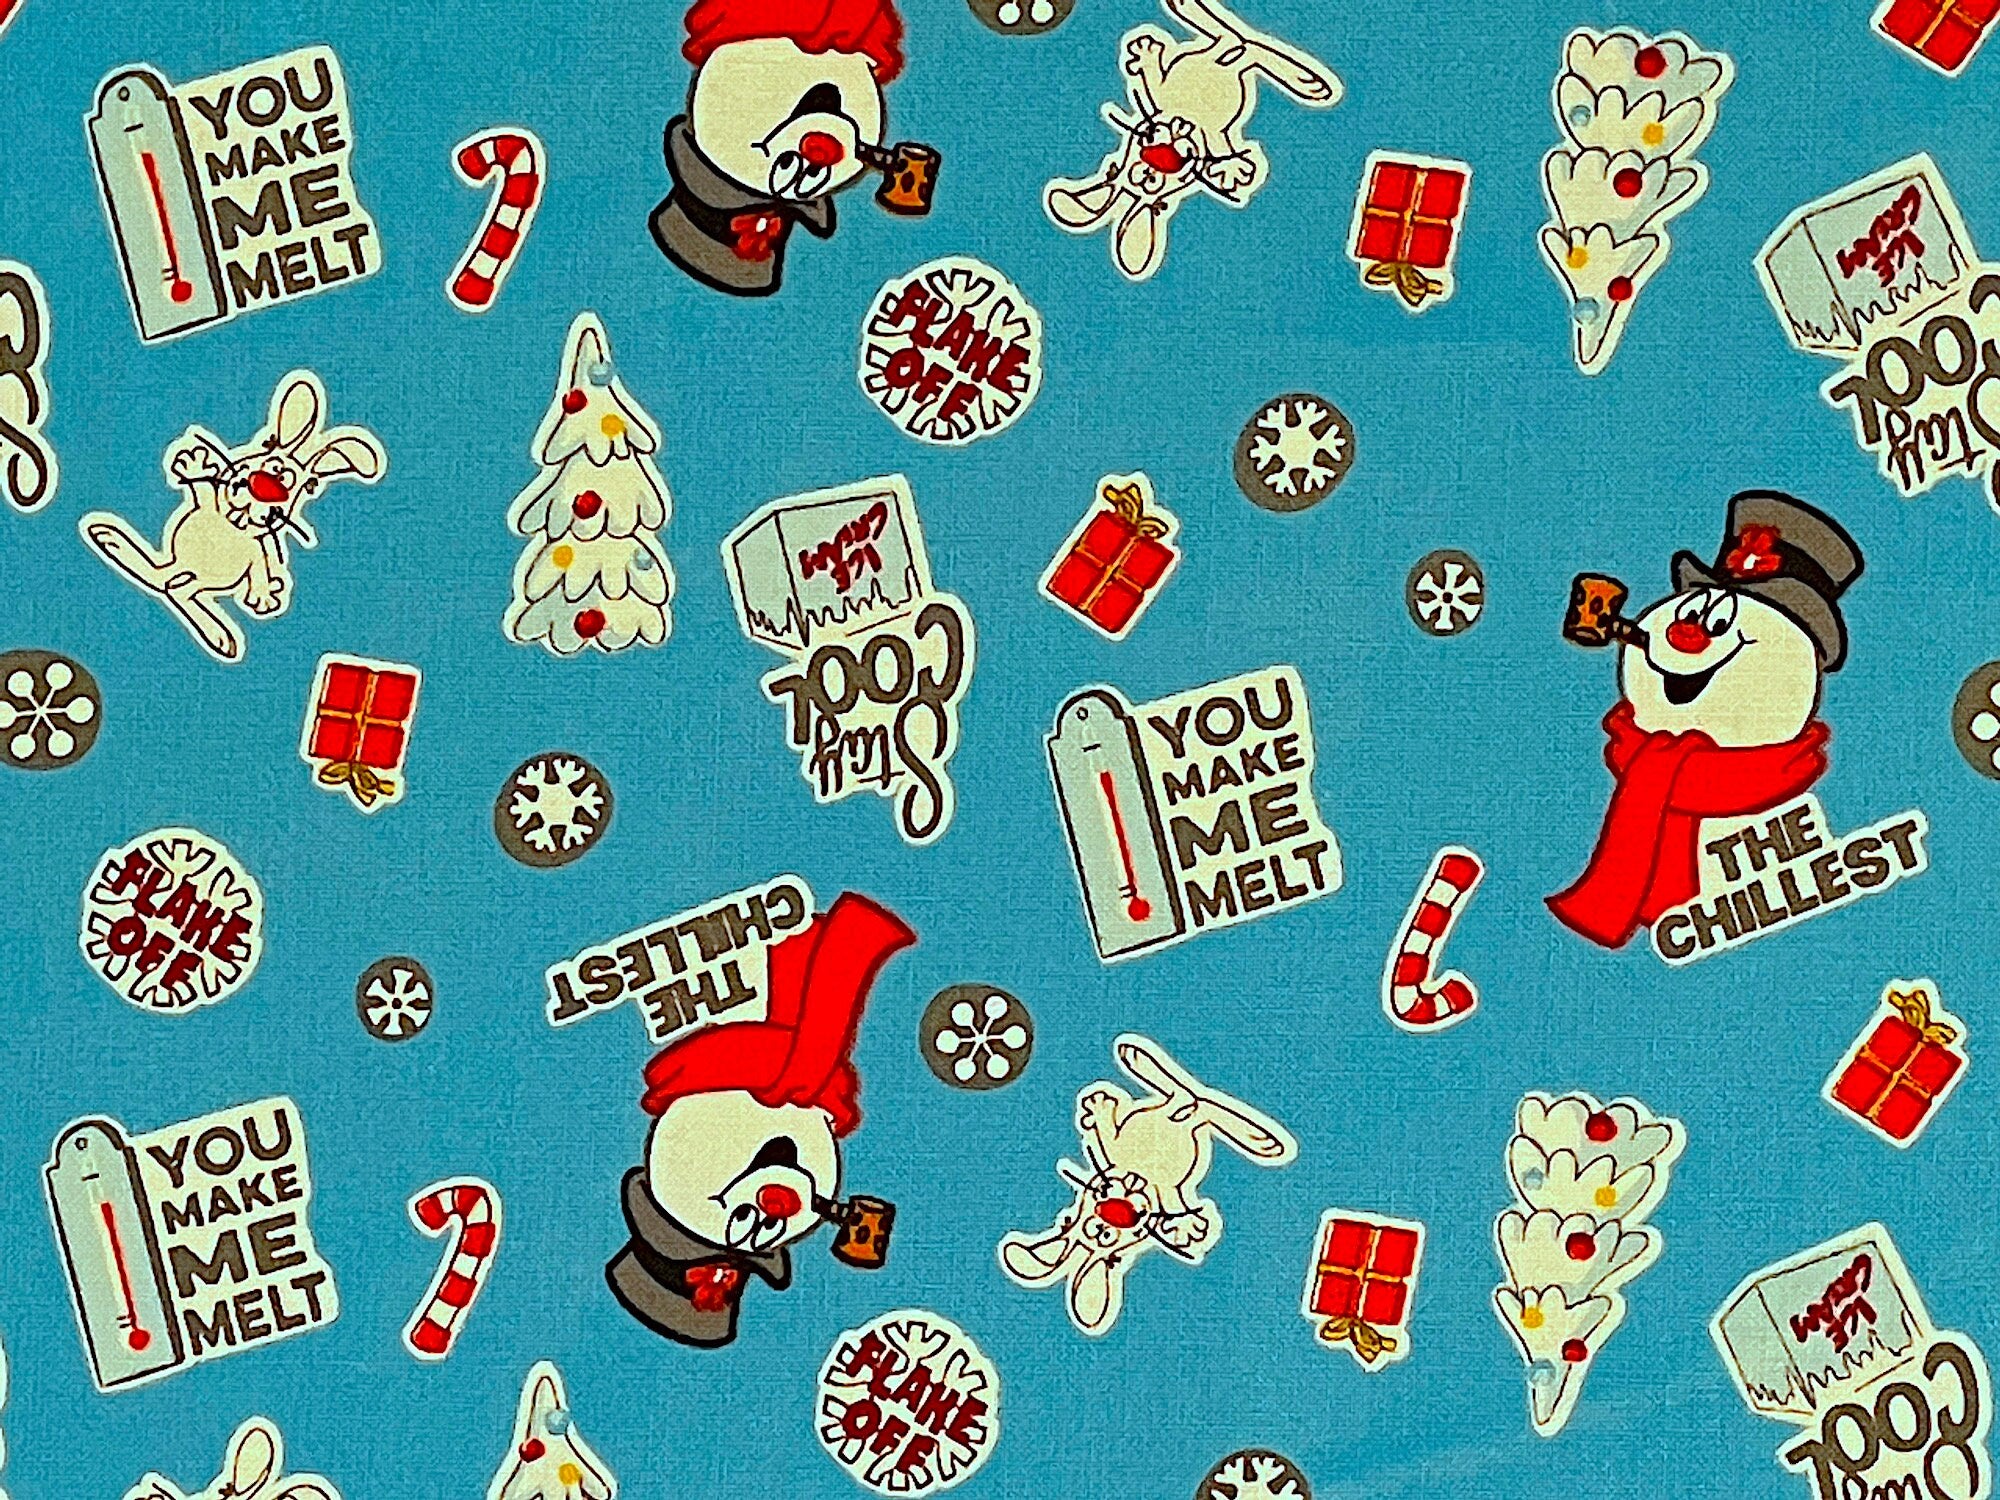 Blue cotton fabric covered with Frosty the Snowman, trees, candy canes, rabbits and snowflakes.